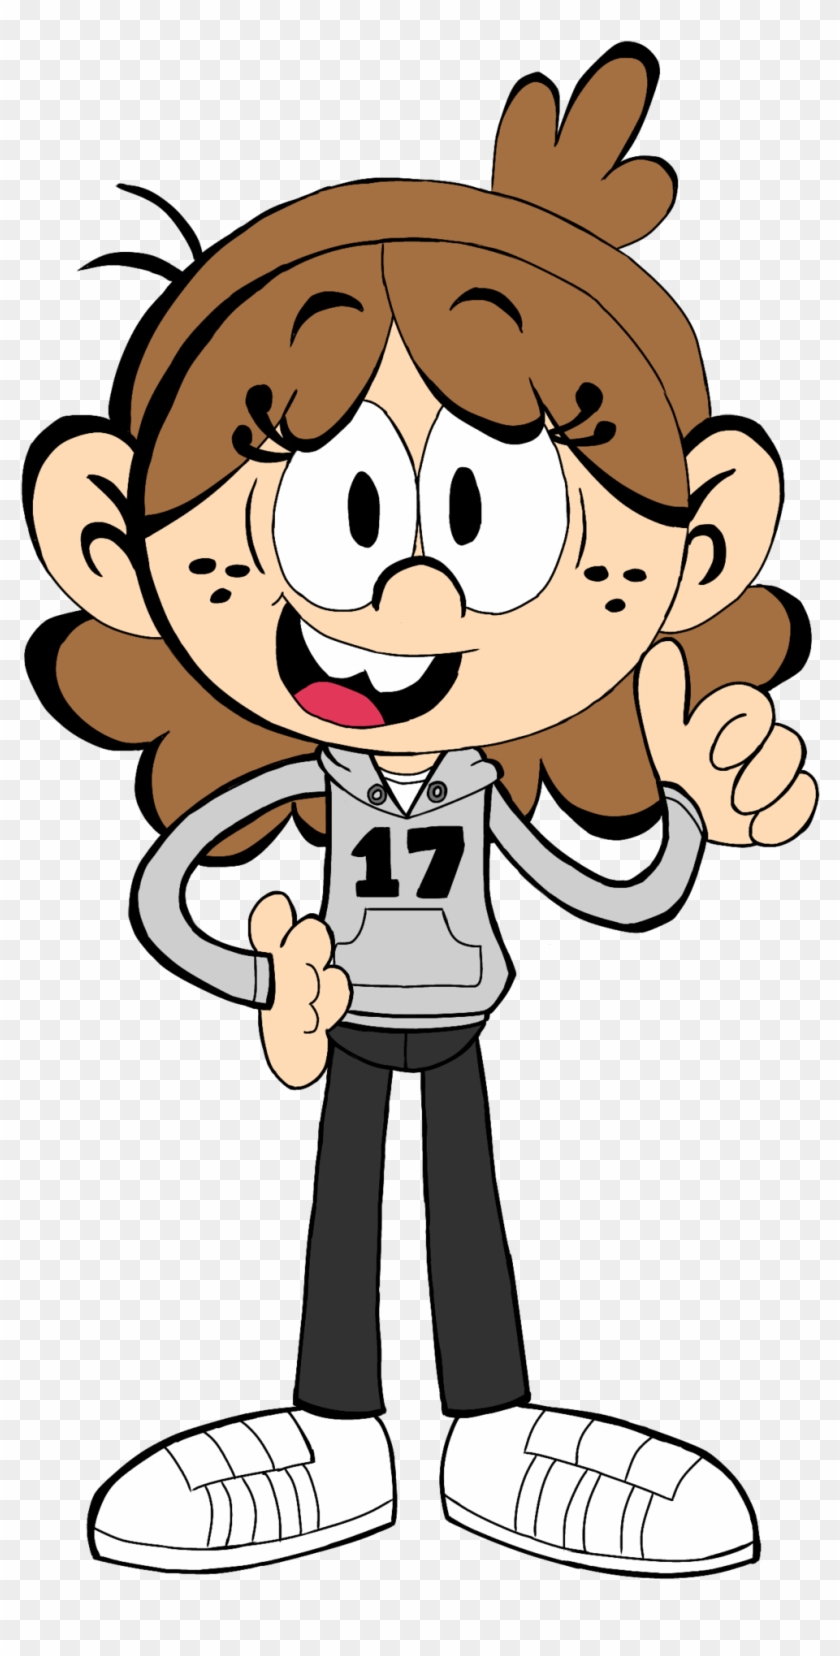 Me In The Loud House By Pantherpryde - Loud House Transparent #138268